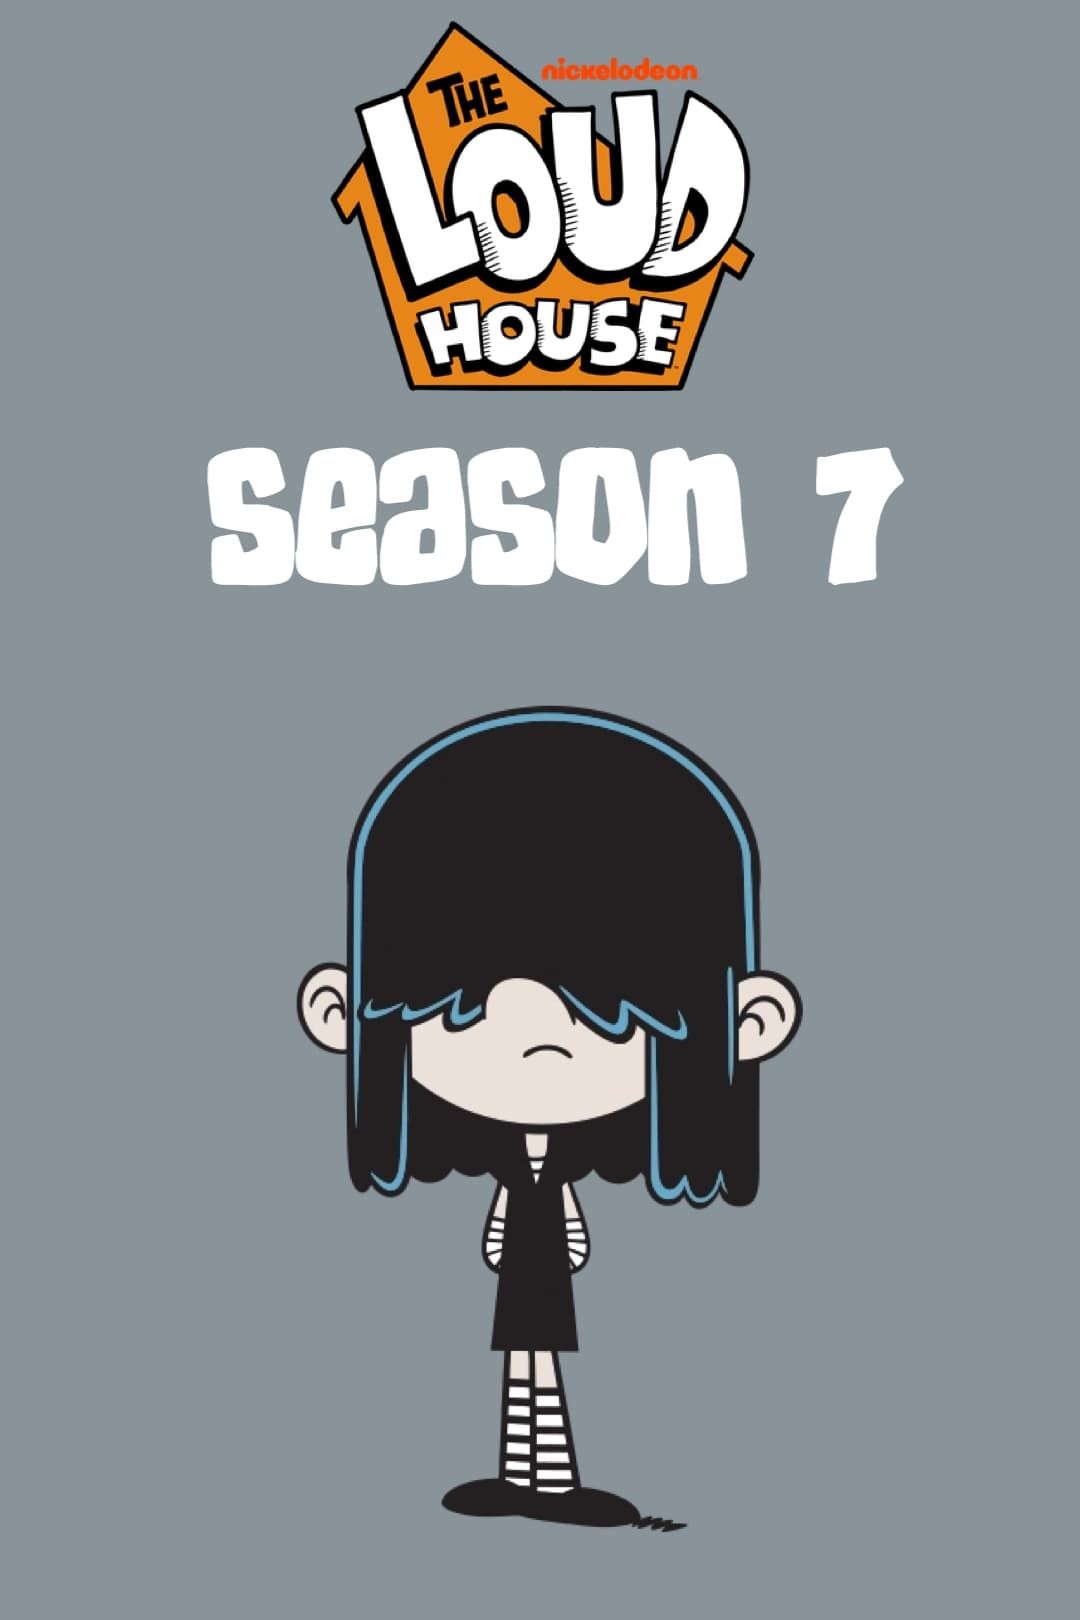 The Loud House - Nickelodeon Series - Where To Watch